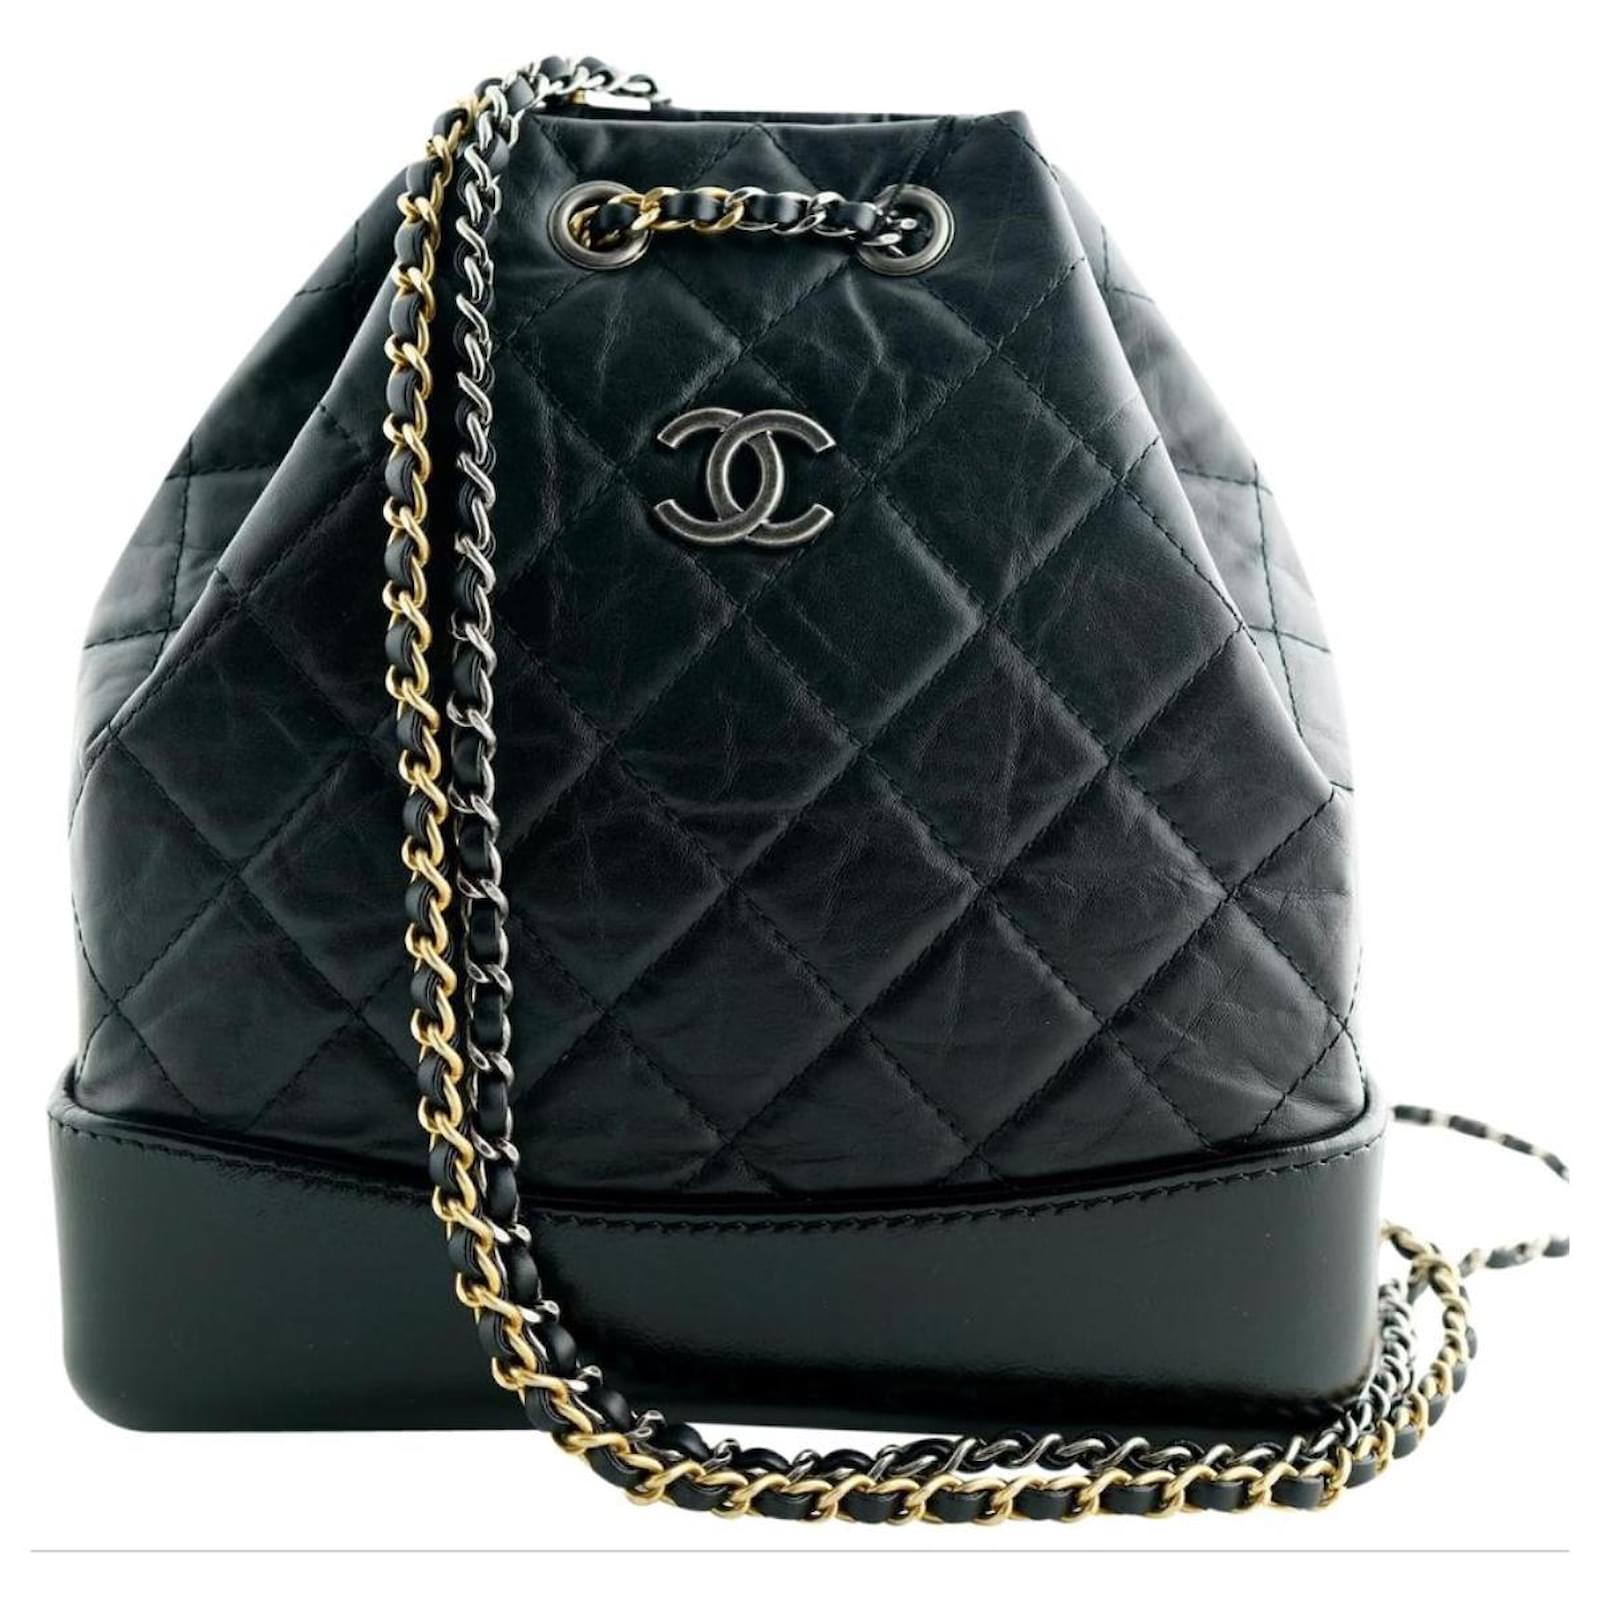 bag, chanel gabrielle backpack, black backpack, backpack, chanel bag,  accessory, streetstyle, chanel - Wheretoget